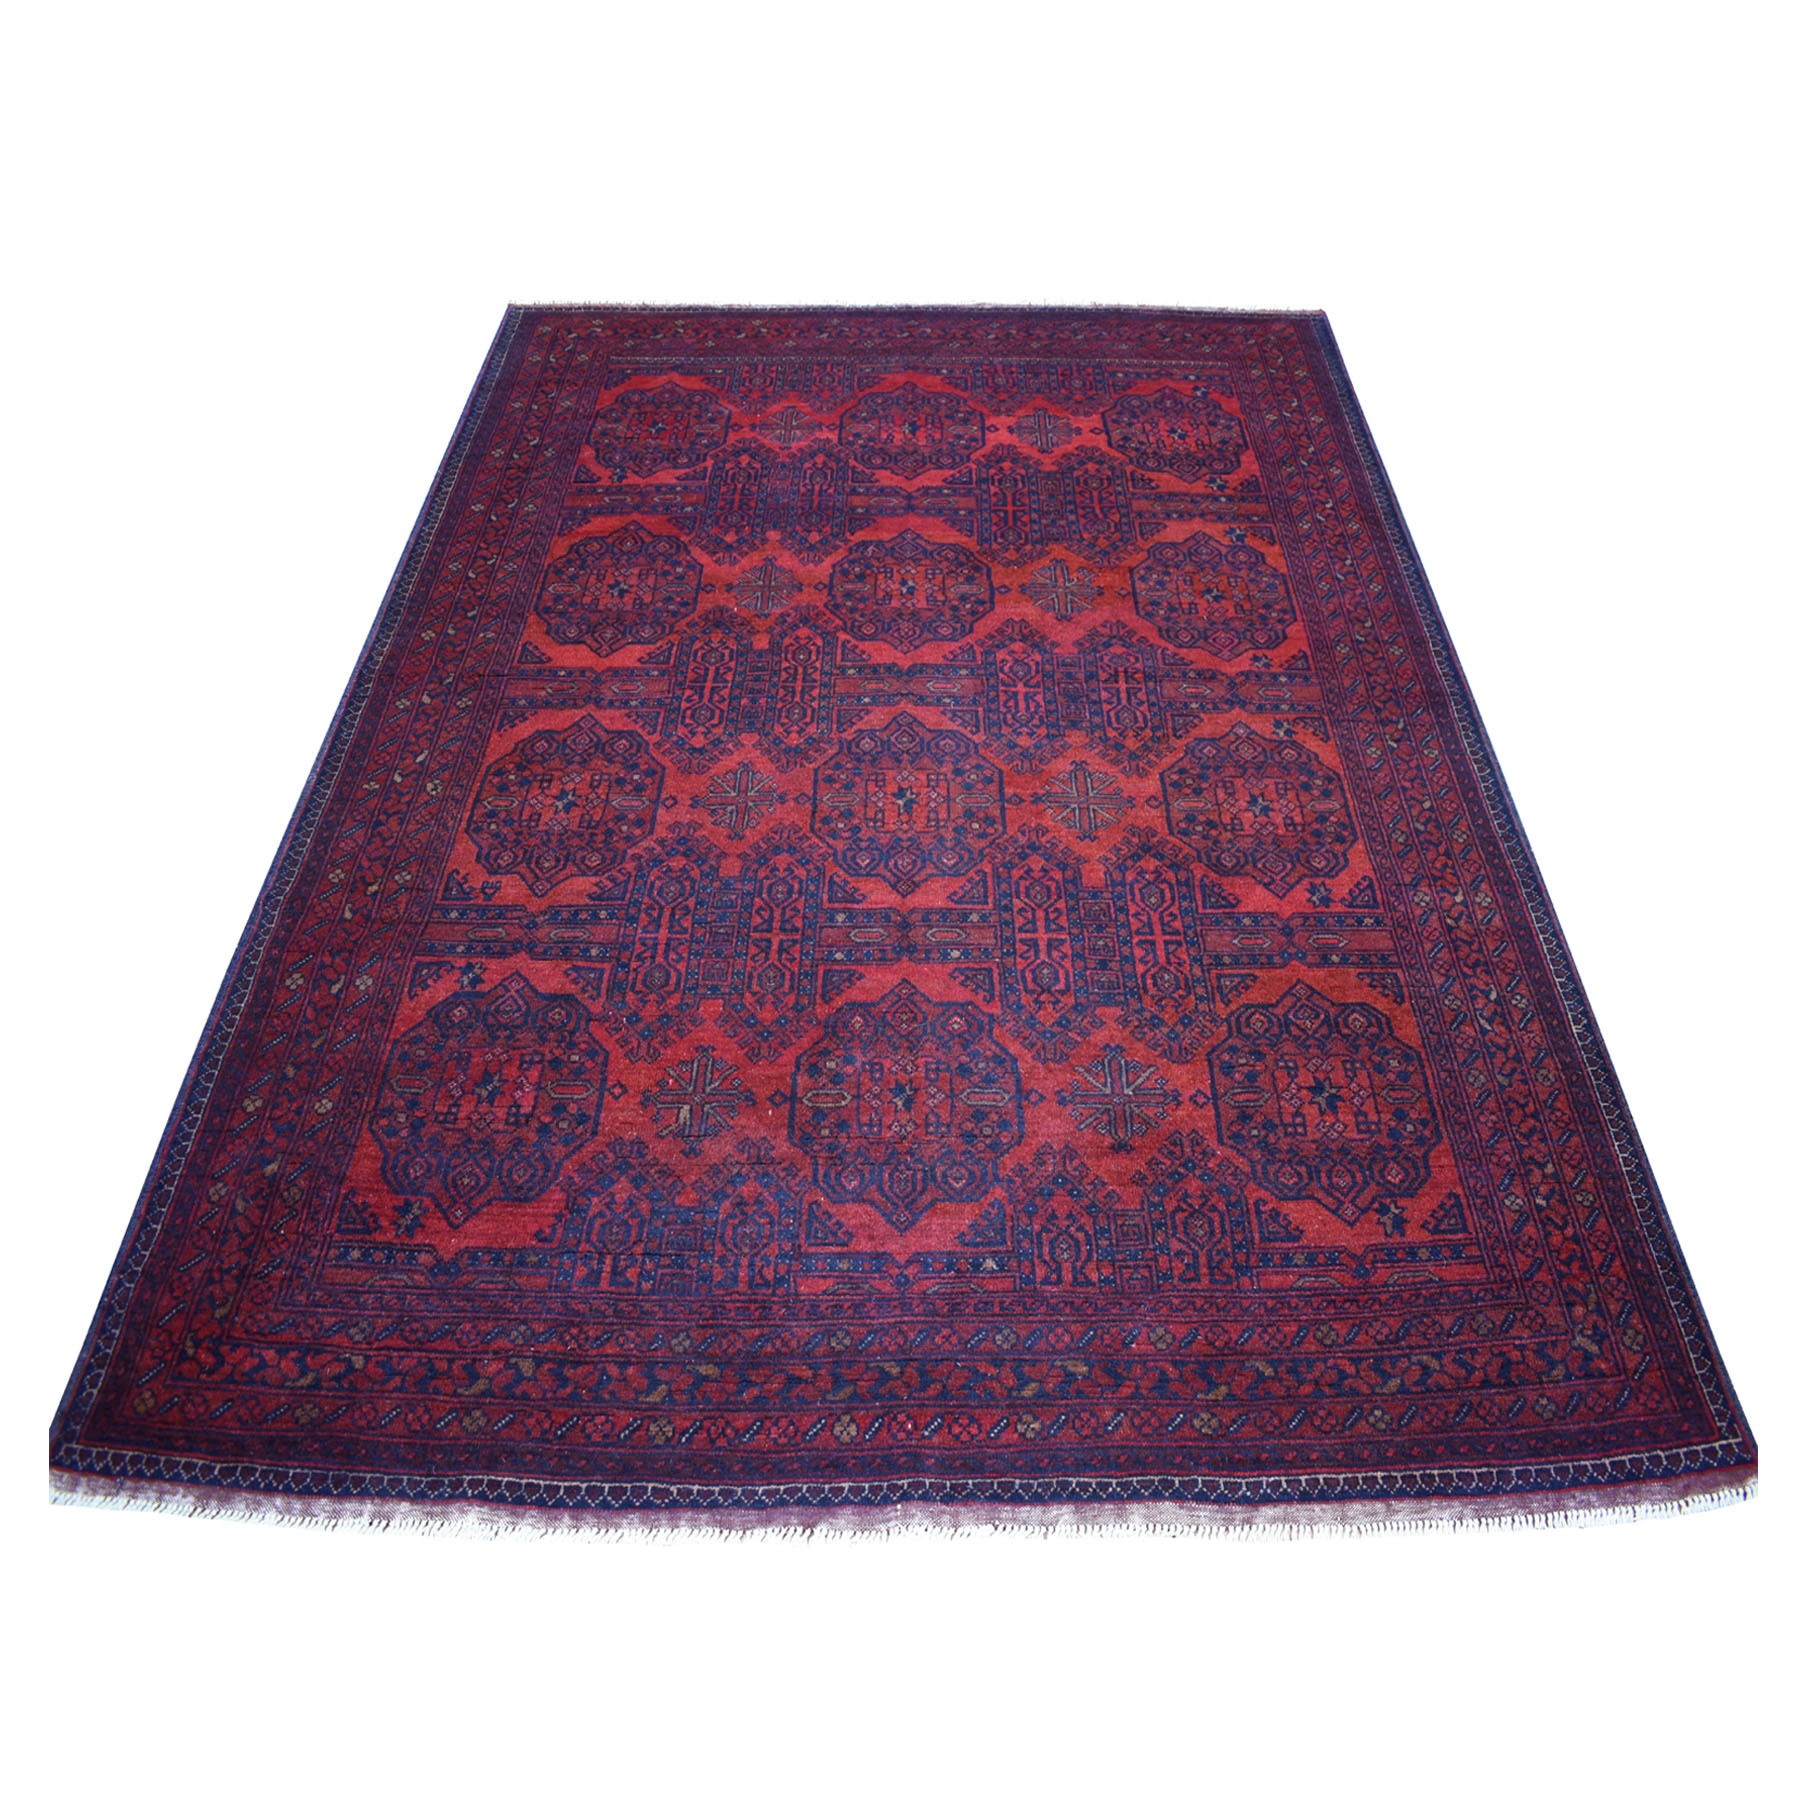 5'9"X7'5" Deep And Saturated Red Geometric Afghan Andkhoy Pure Wool Hand Knotted Oriental Rug moaec690